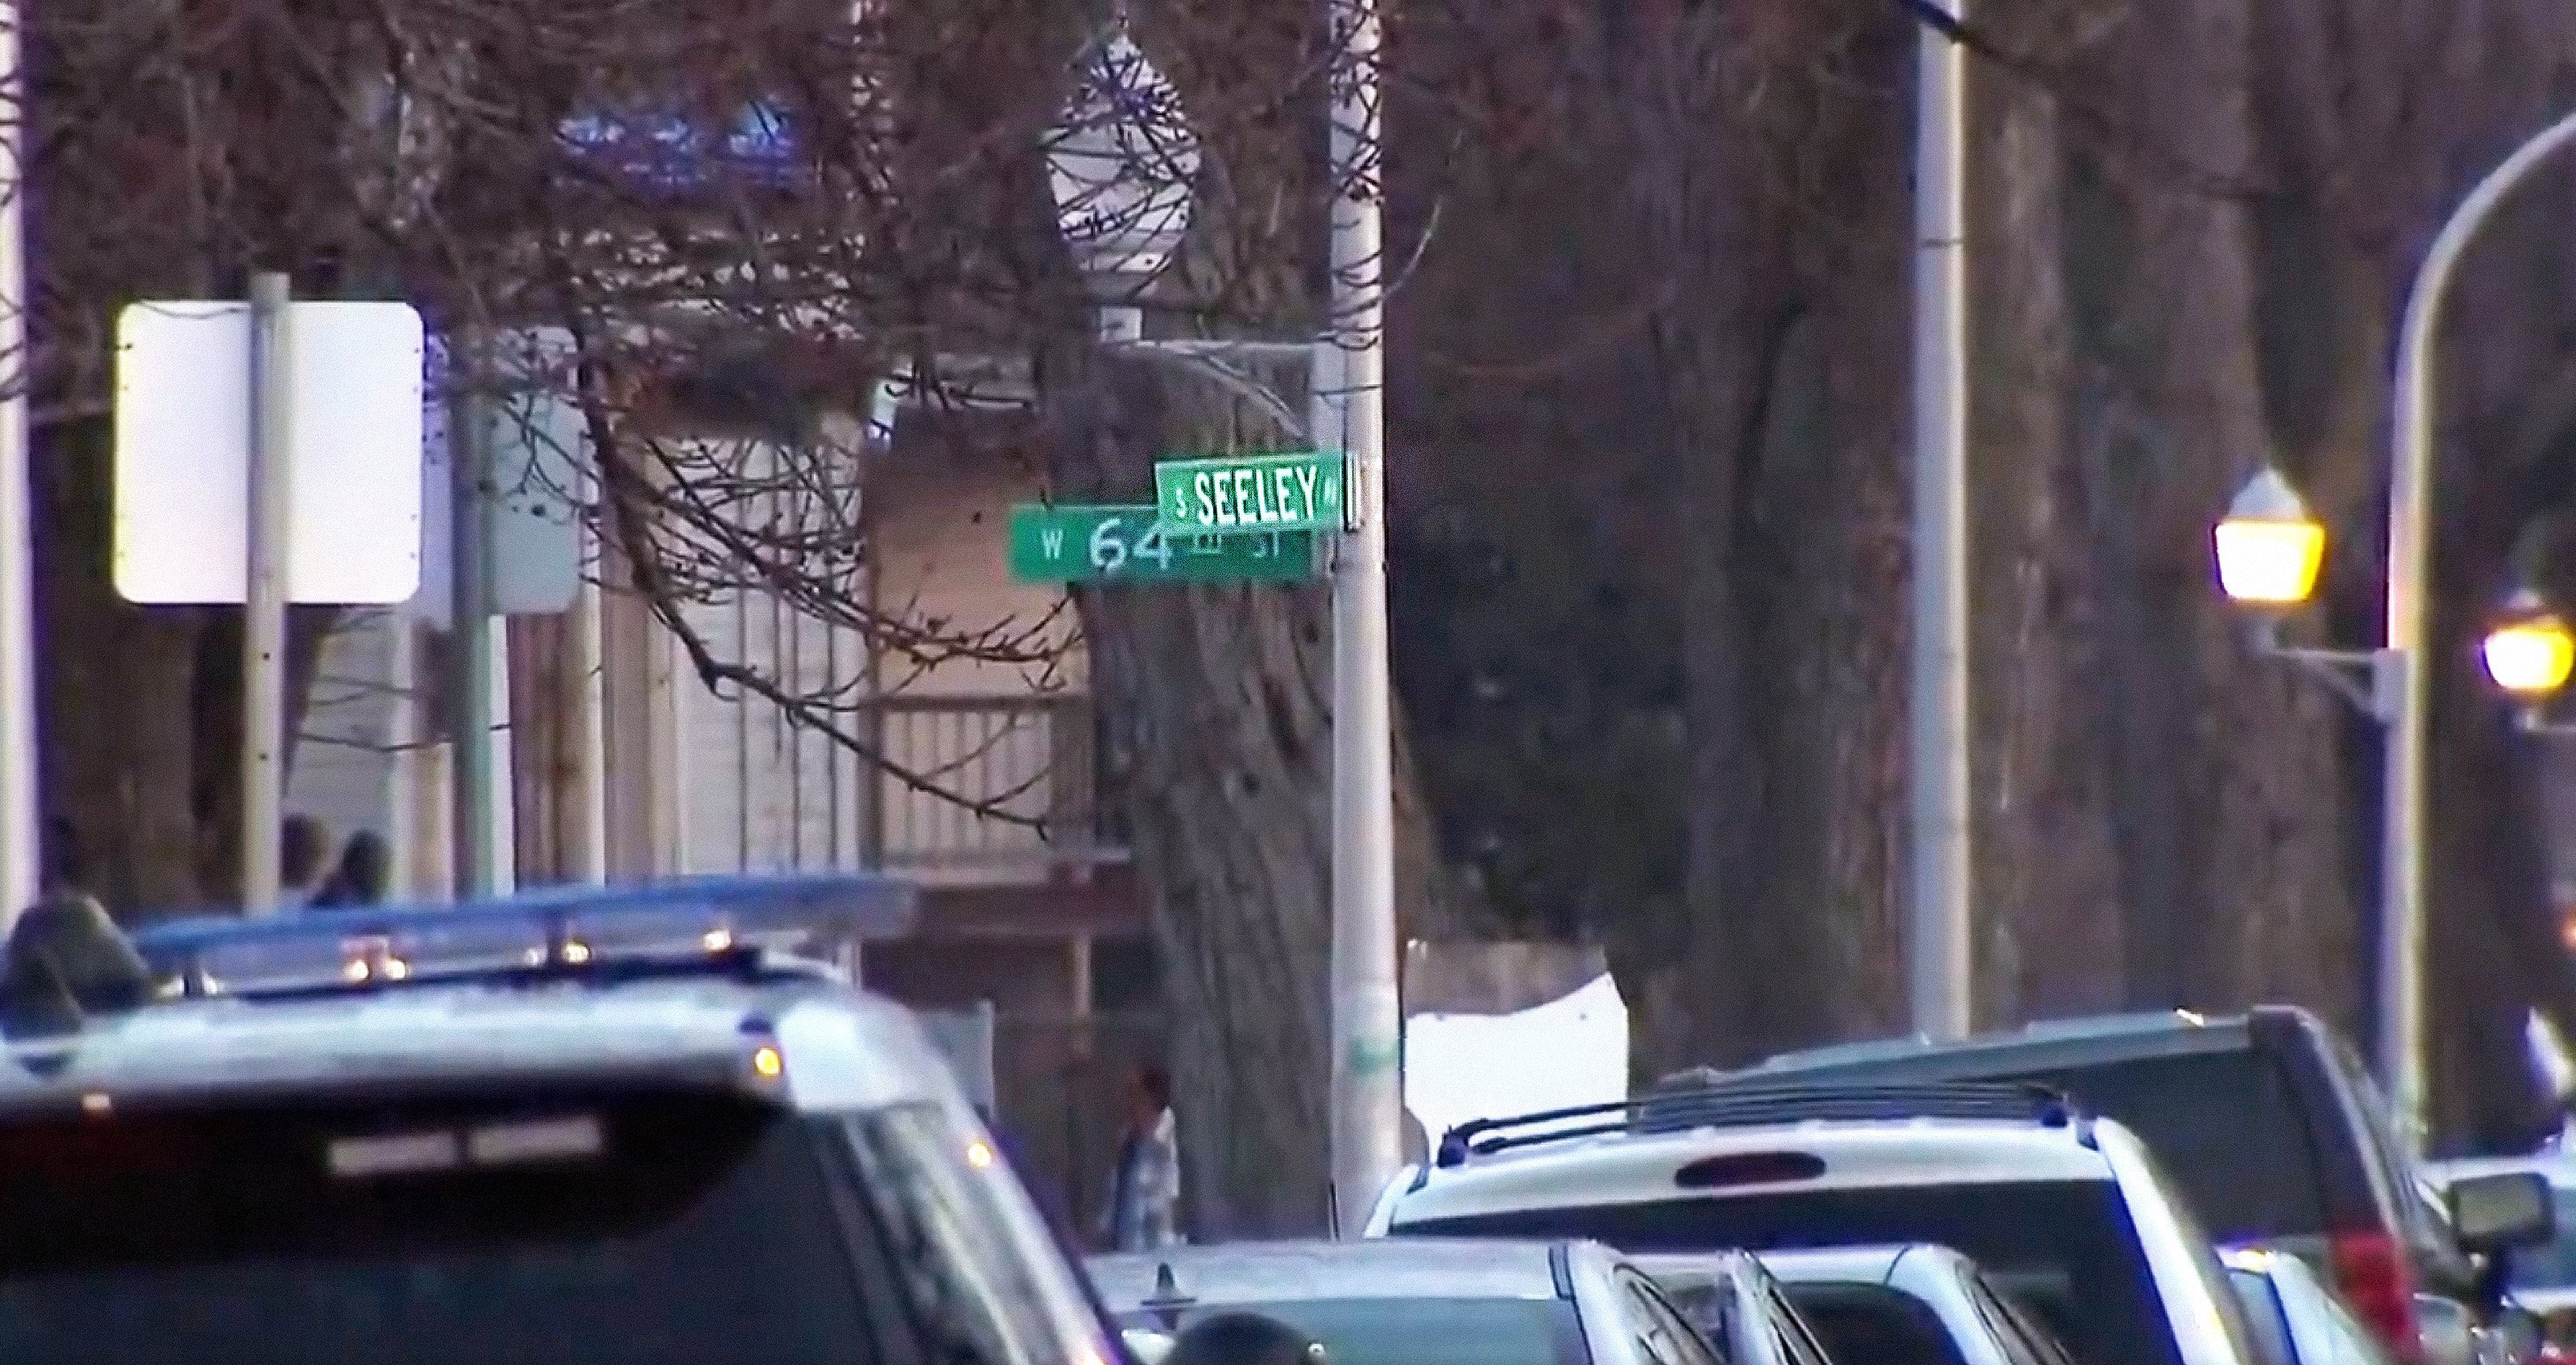 A road sign representing the street where the crime took place | Photo: NBC Chicago